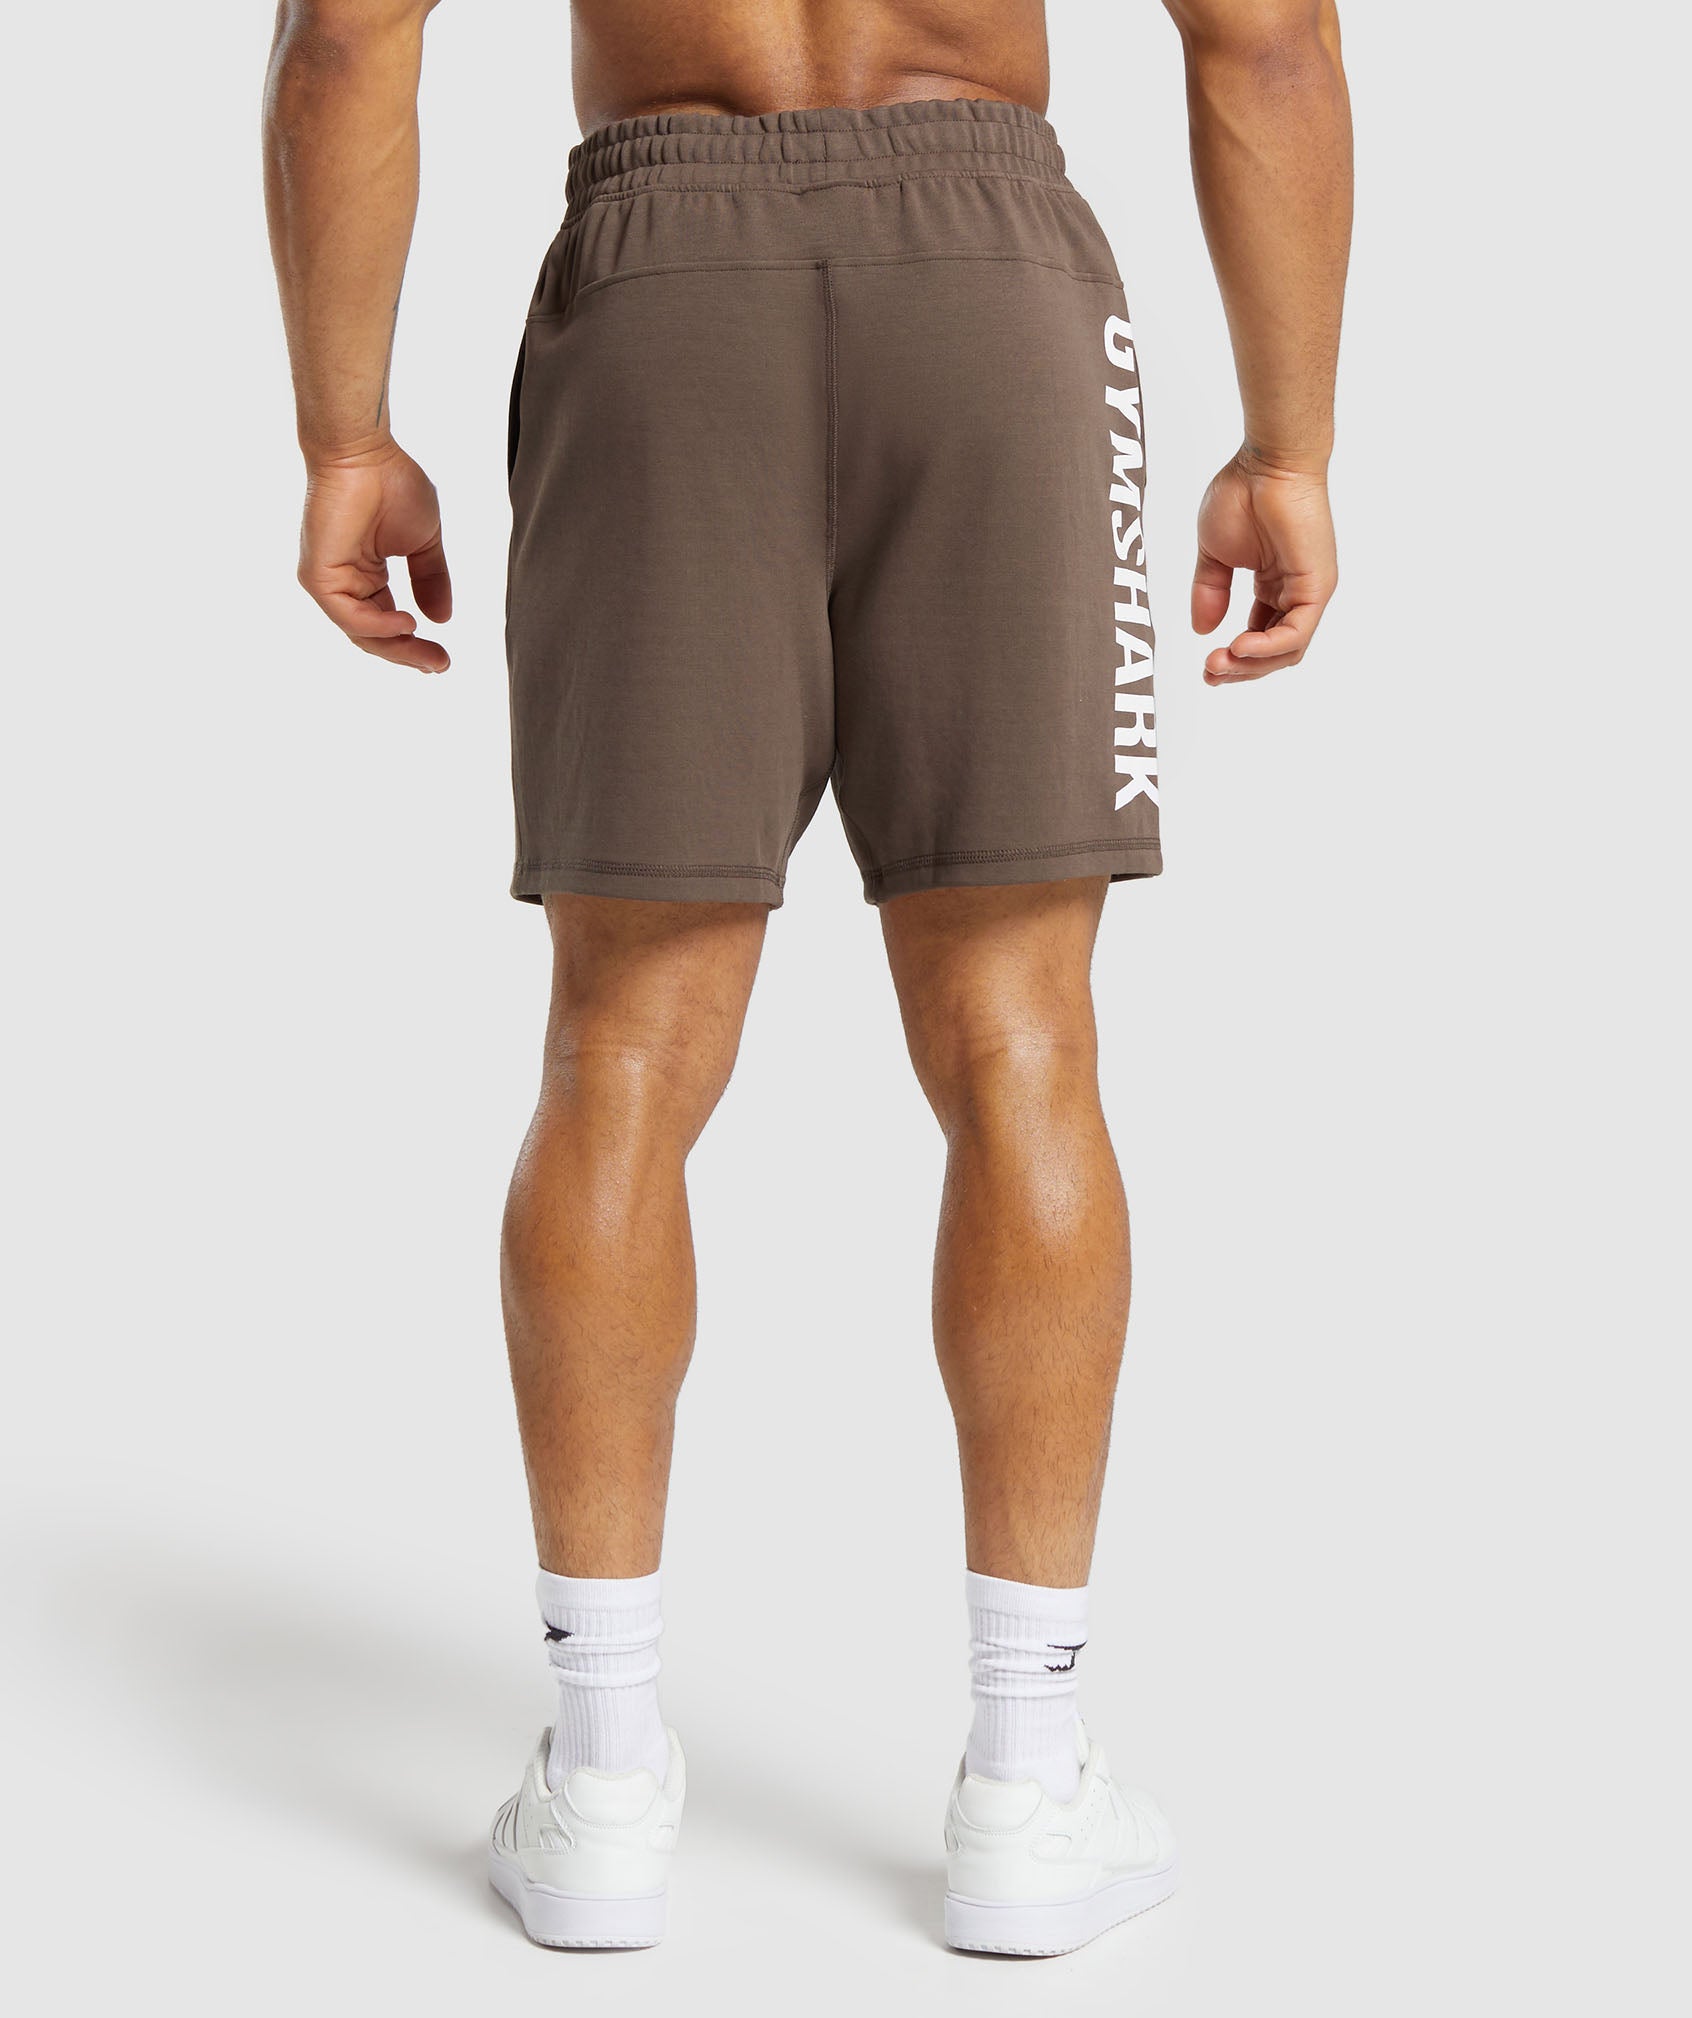 Impact Shorts in Walnut Brown - view 3